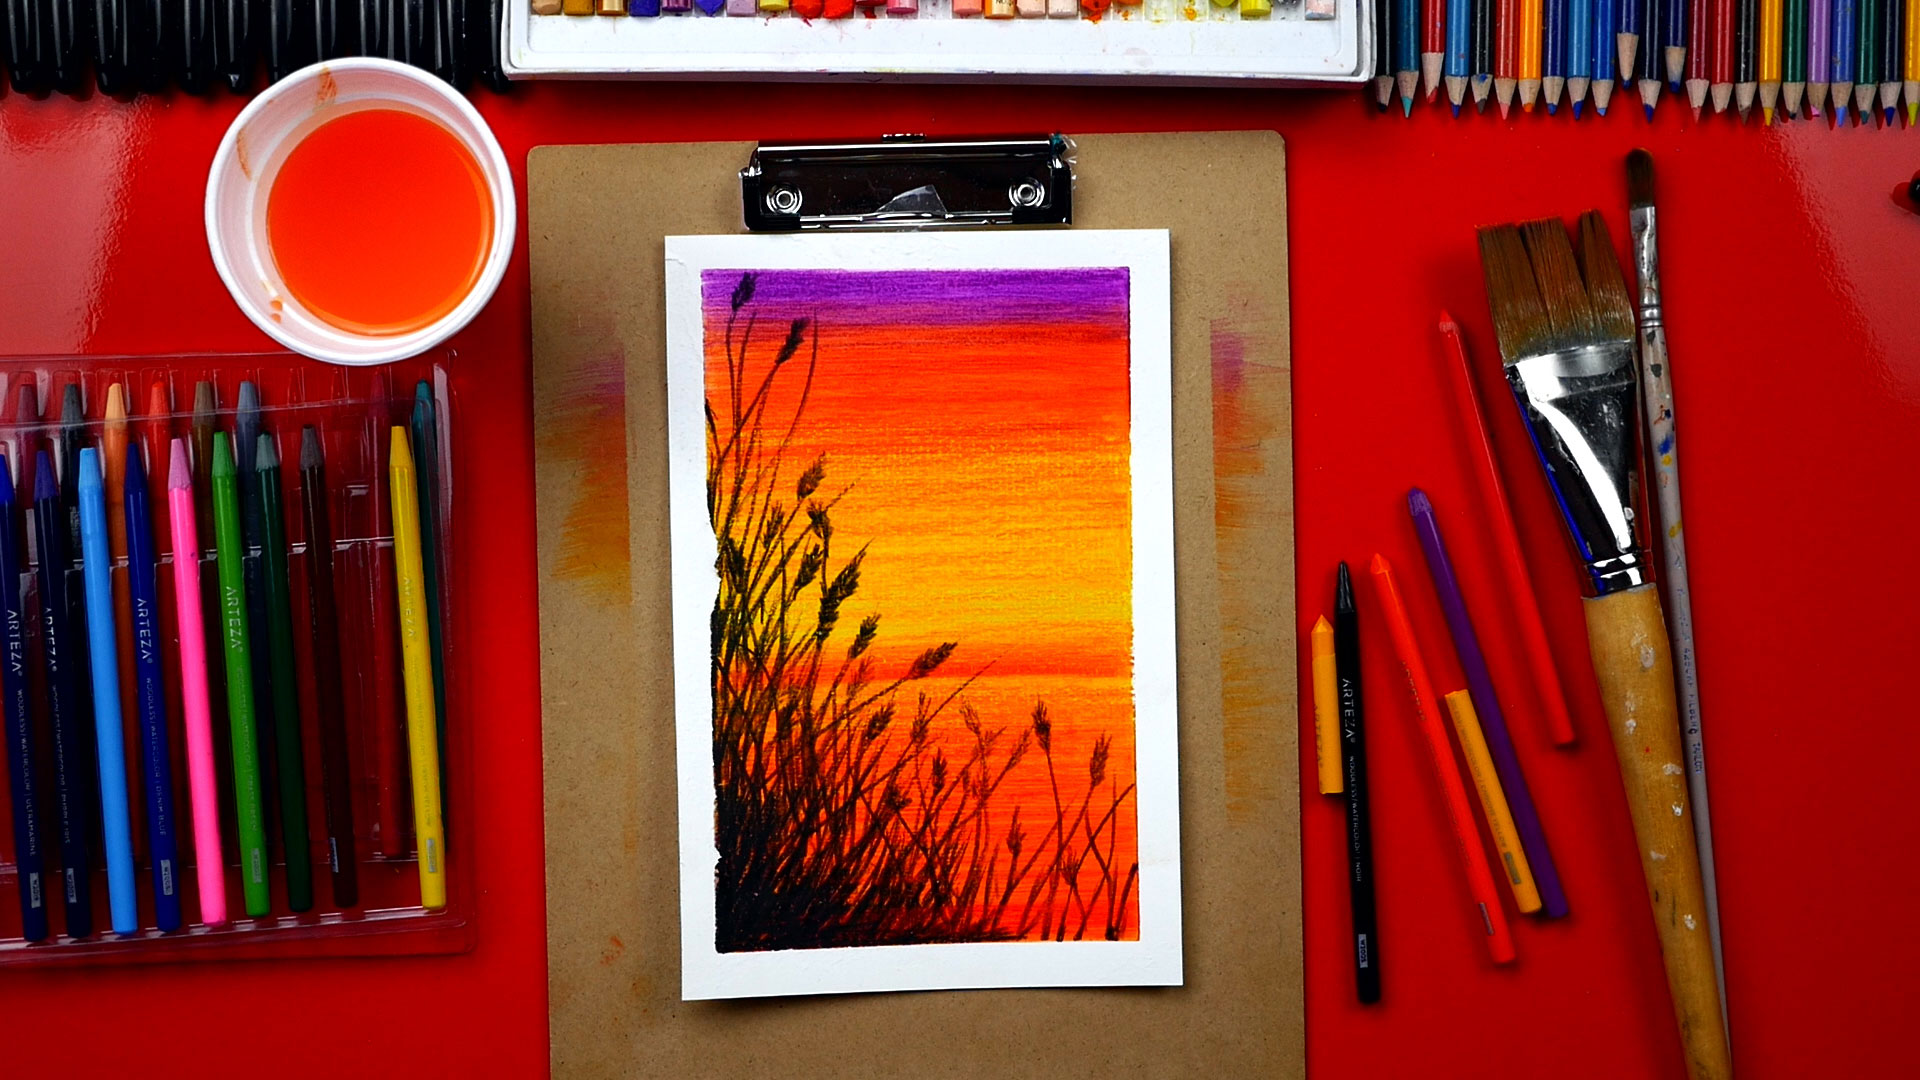 How to Paint with Watercolor Pencils - Painting Ideas for Beginners